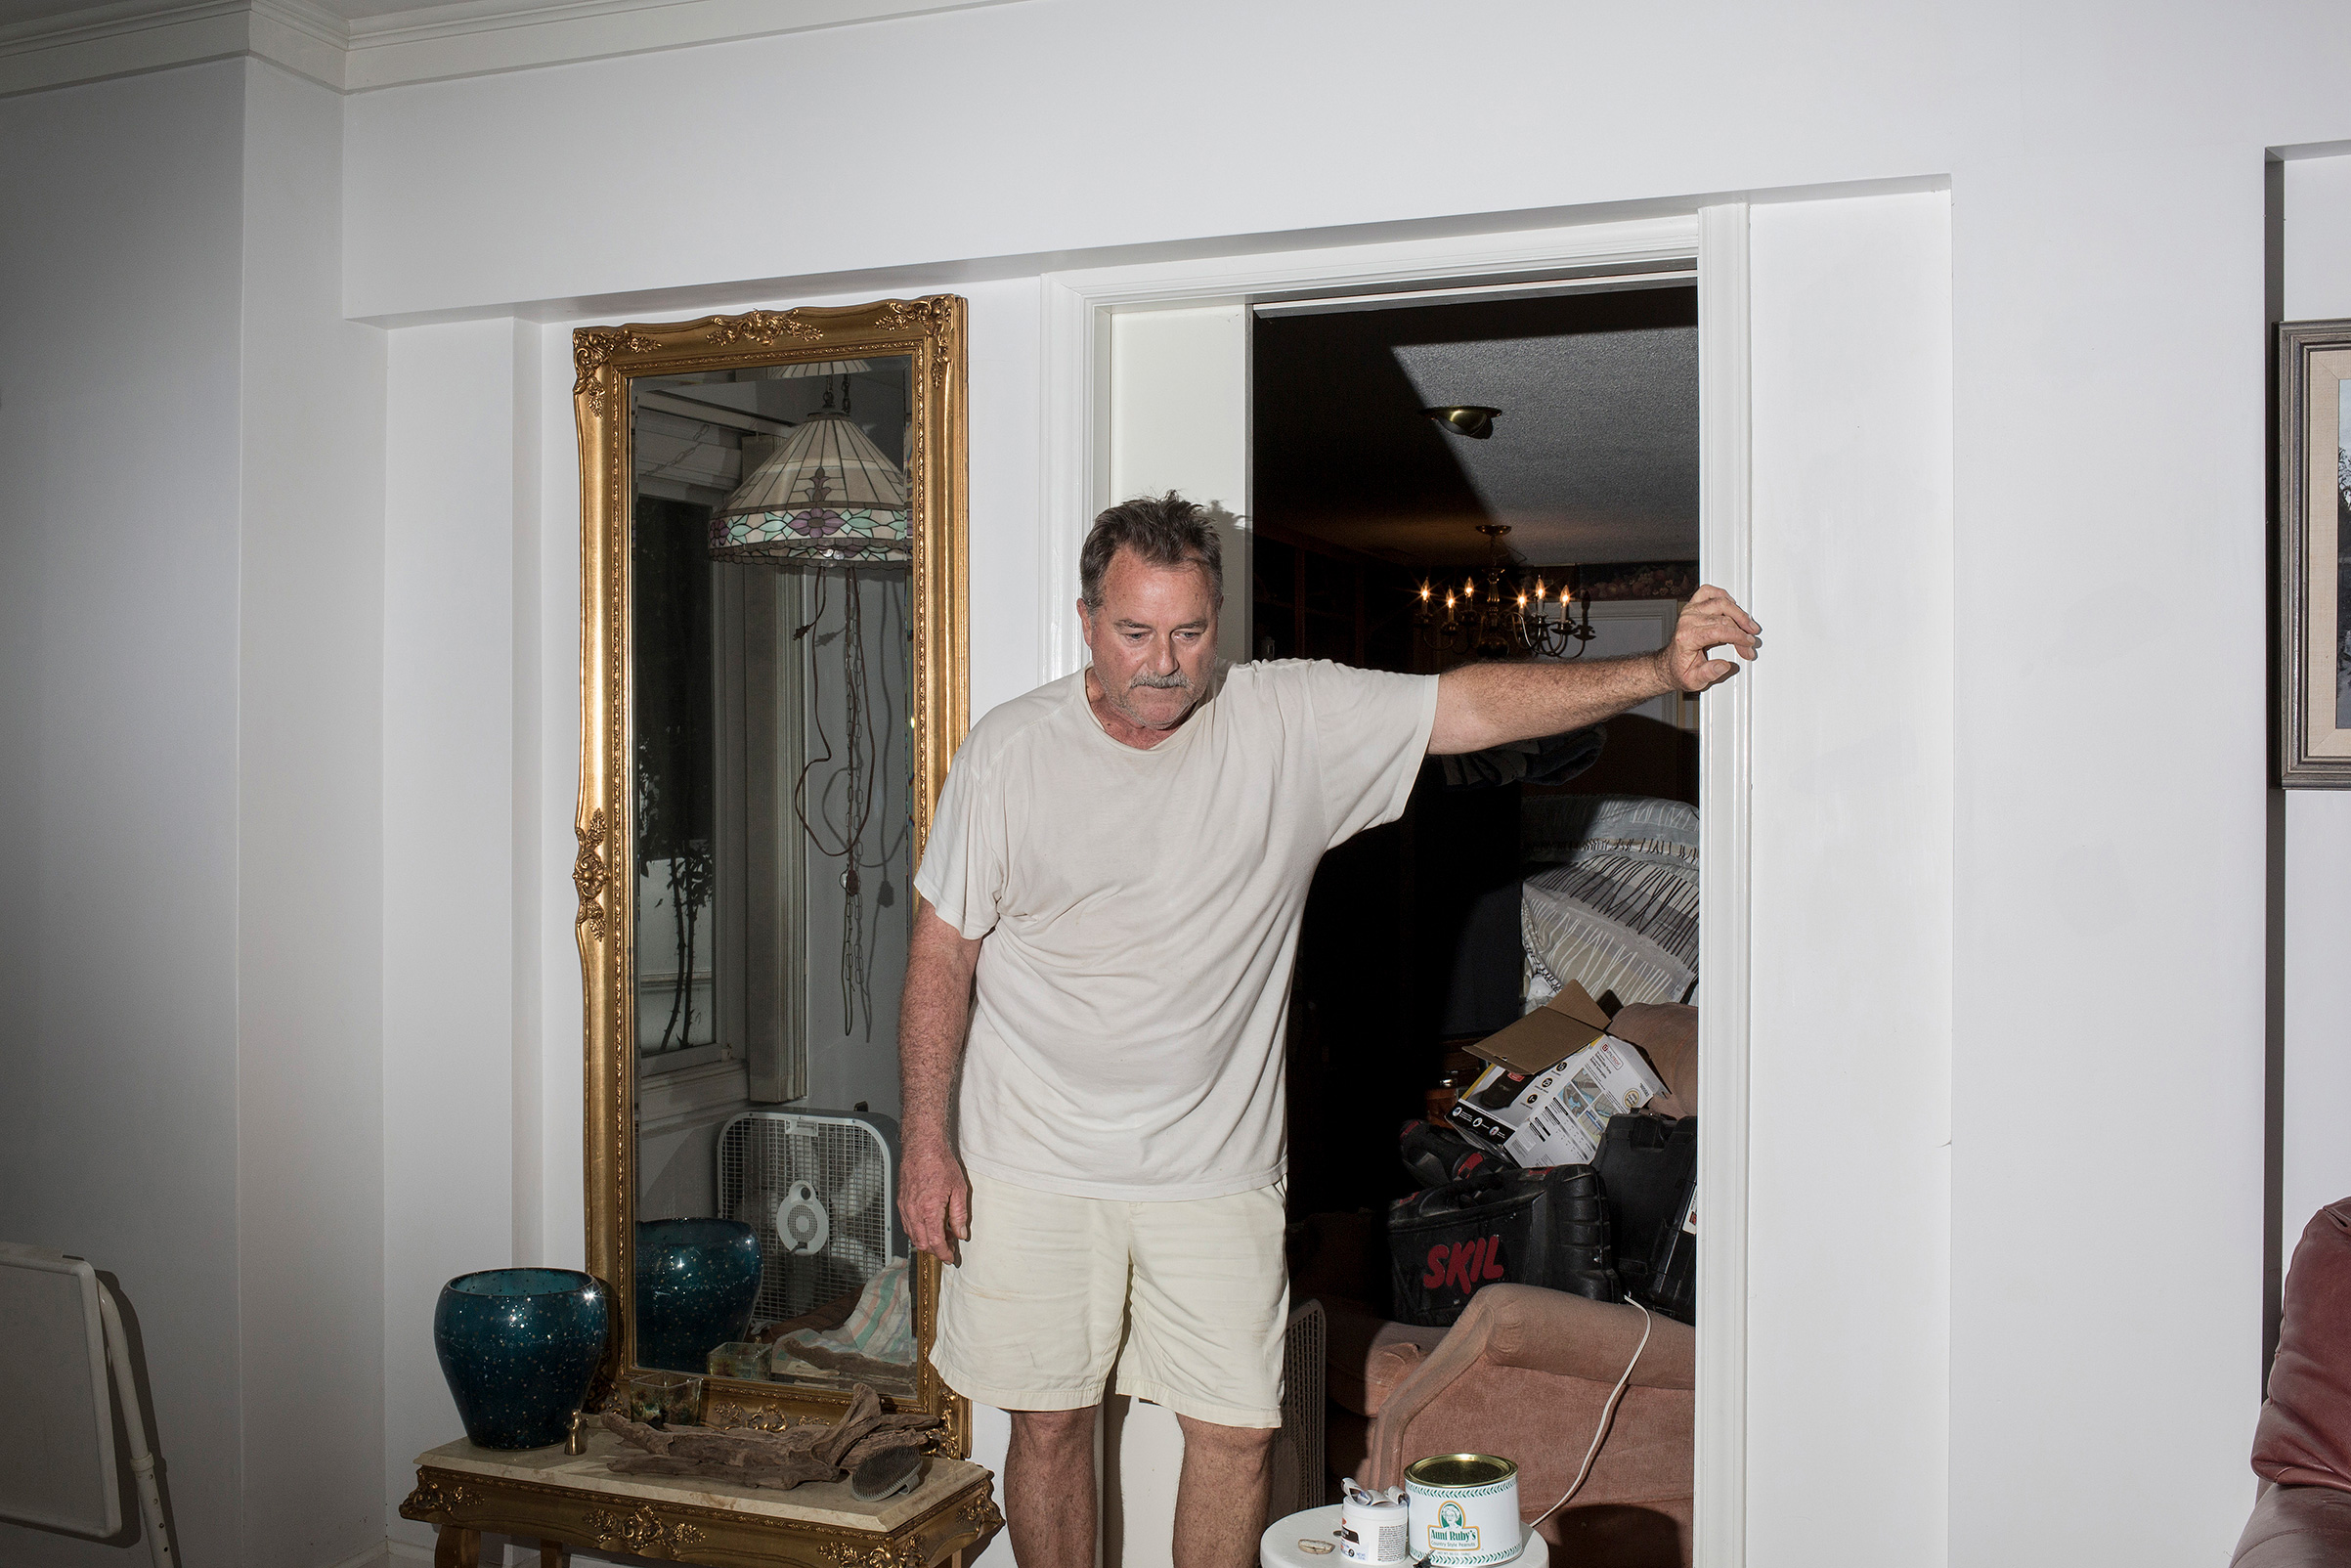 Lee Roy Scott surveys the damage to his home which was flooded due to storm surge from Hurricane Florence in Washington, N.C. on Sept. 15. (Bryan Anselm—Redux for TIME)